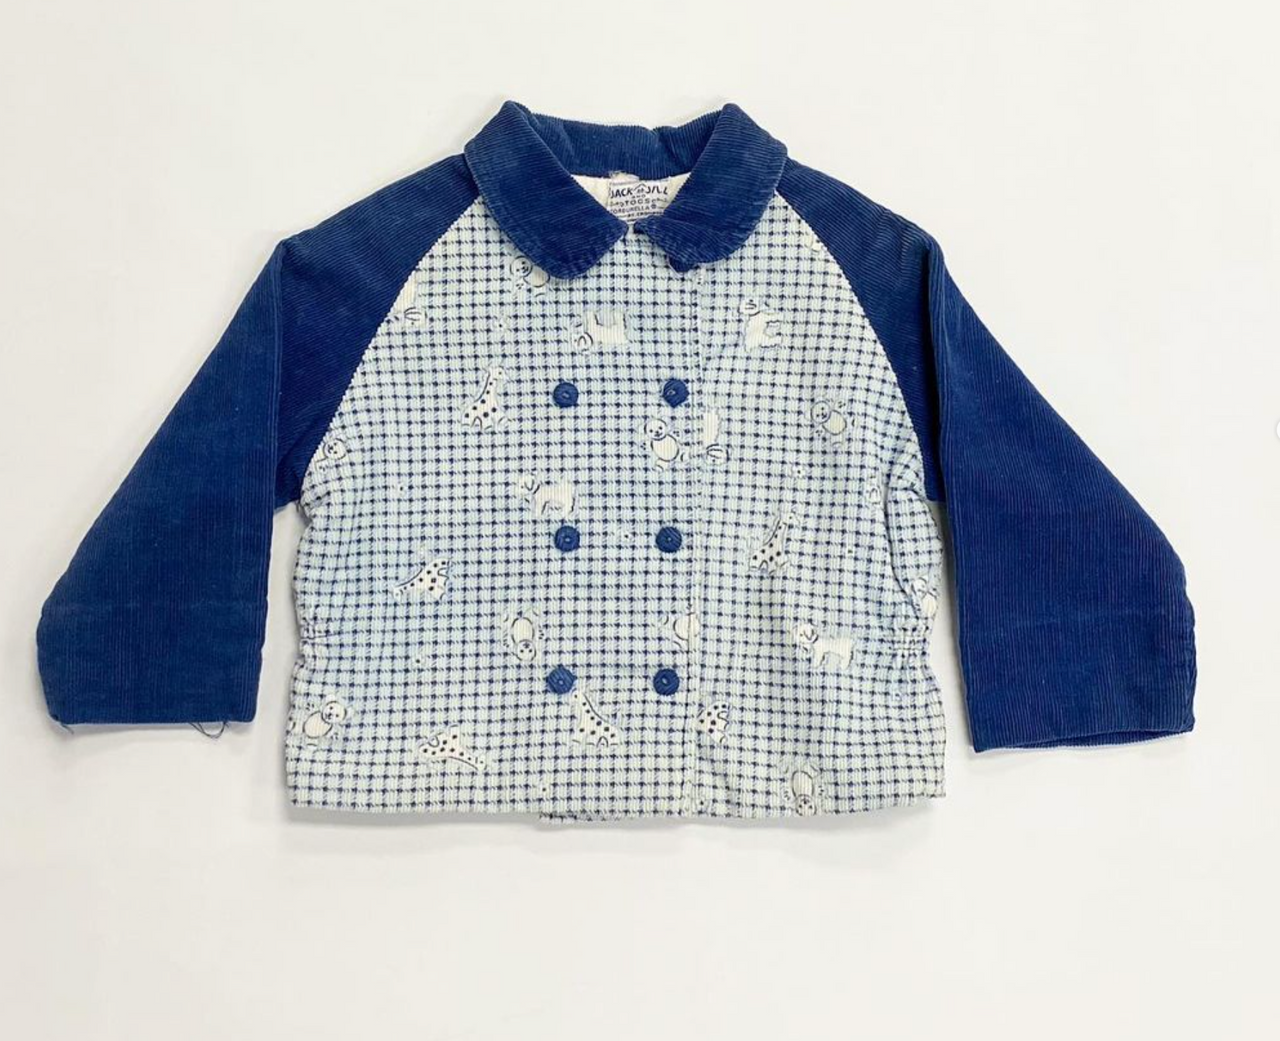 Apple Vintage - Apparel - Jack and Jill Corduroy Button-up